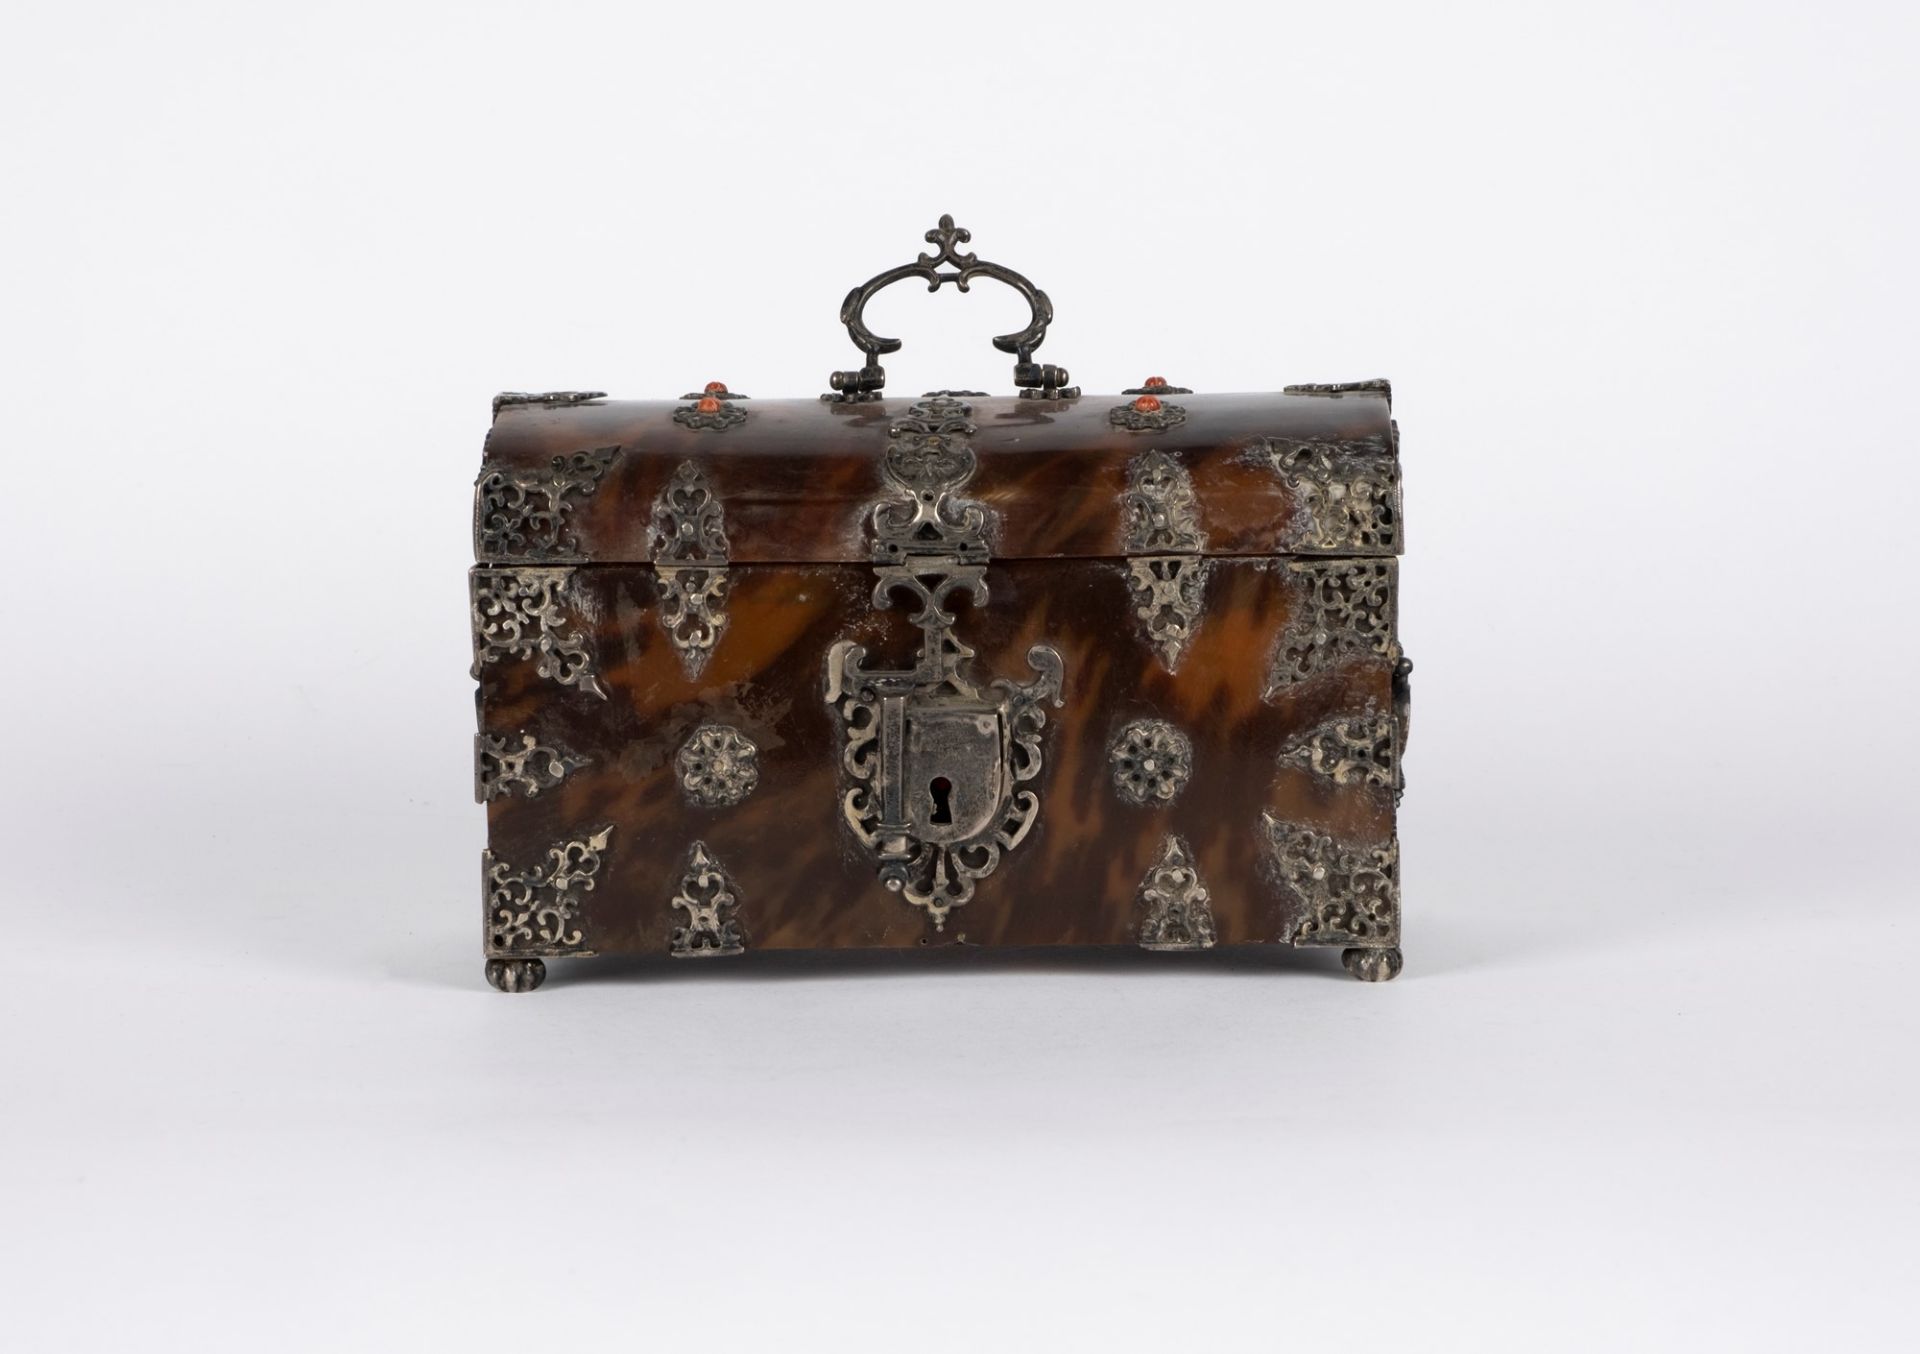 ☼ Turtle casket. Portuguese manufacture, 18th/19th century - Image 2 of 3